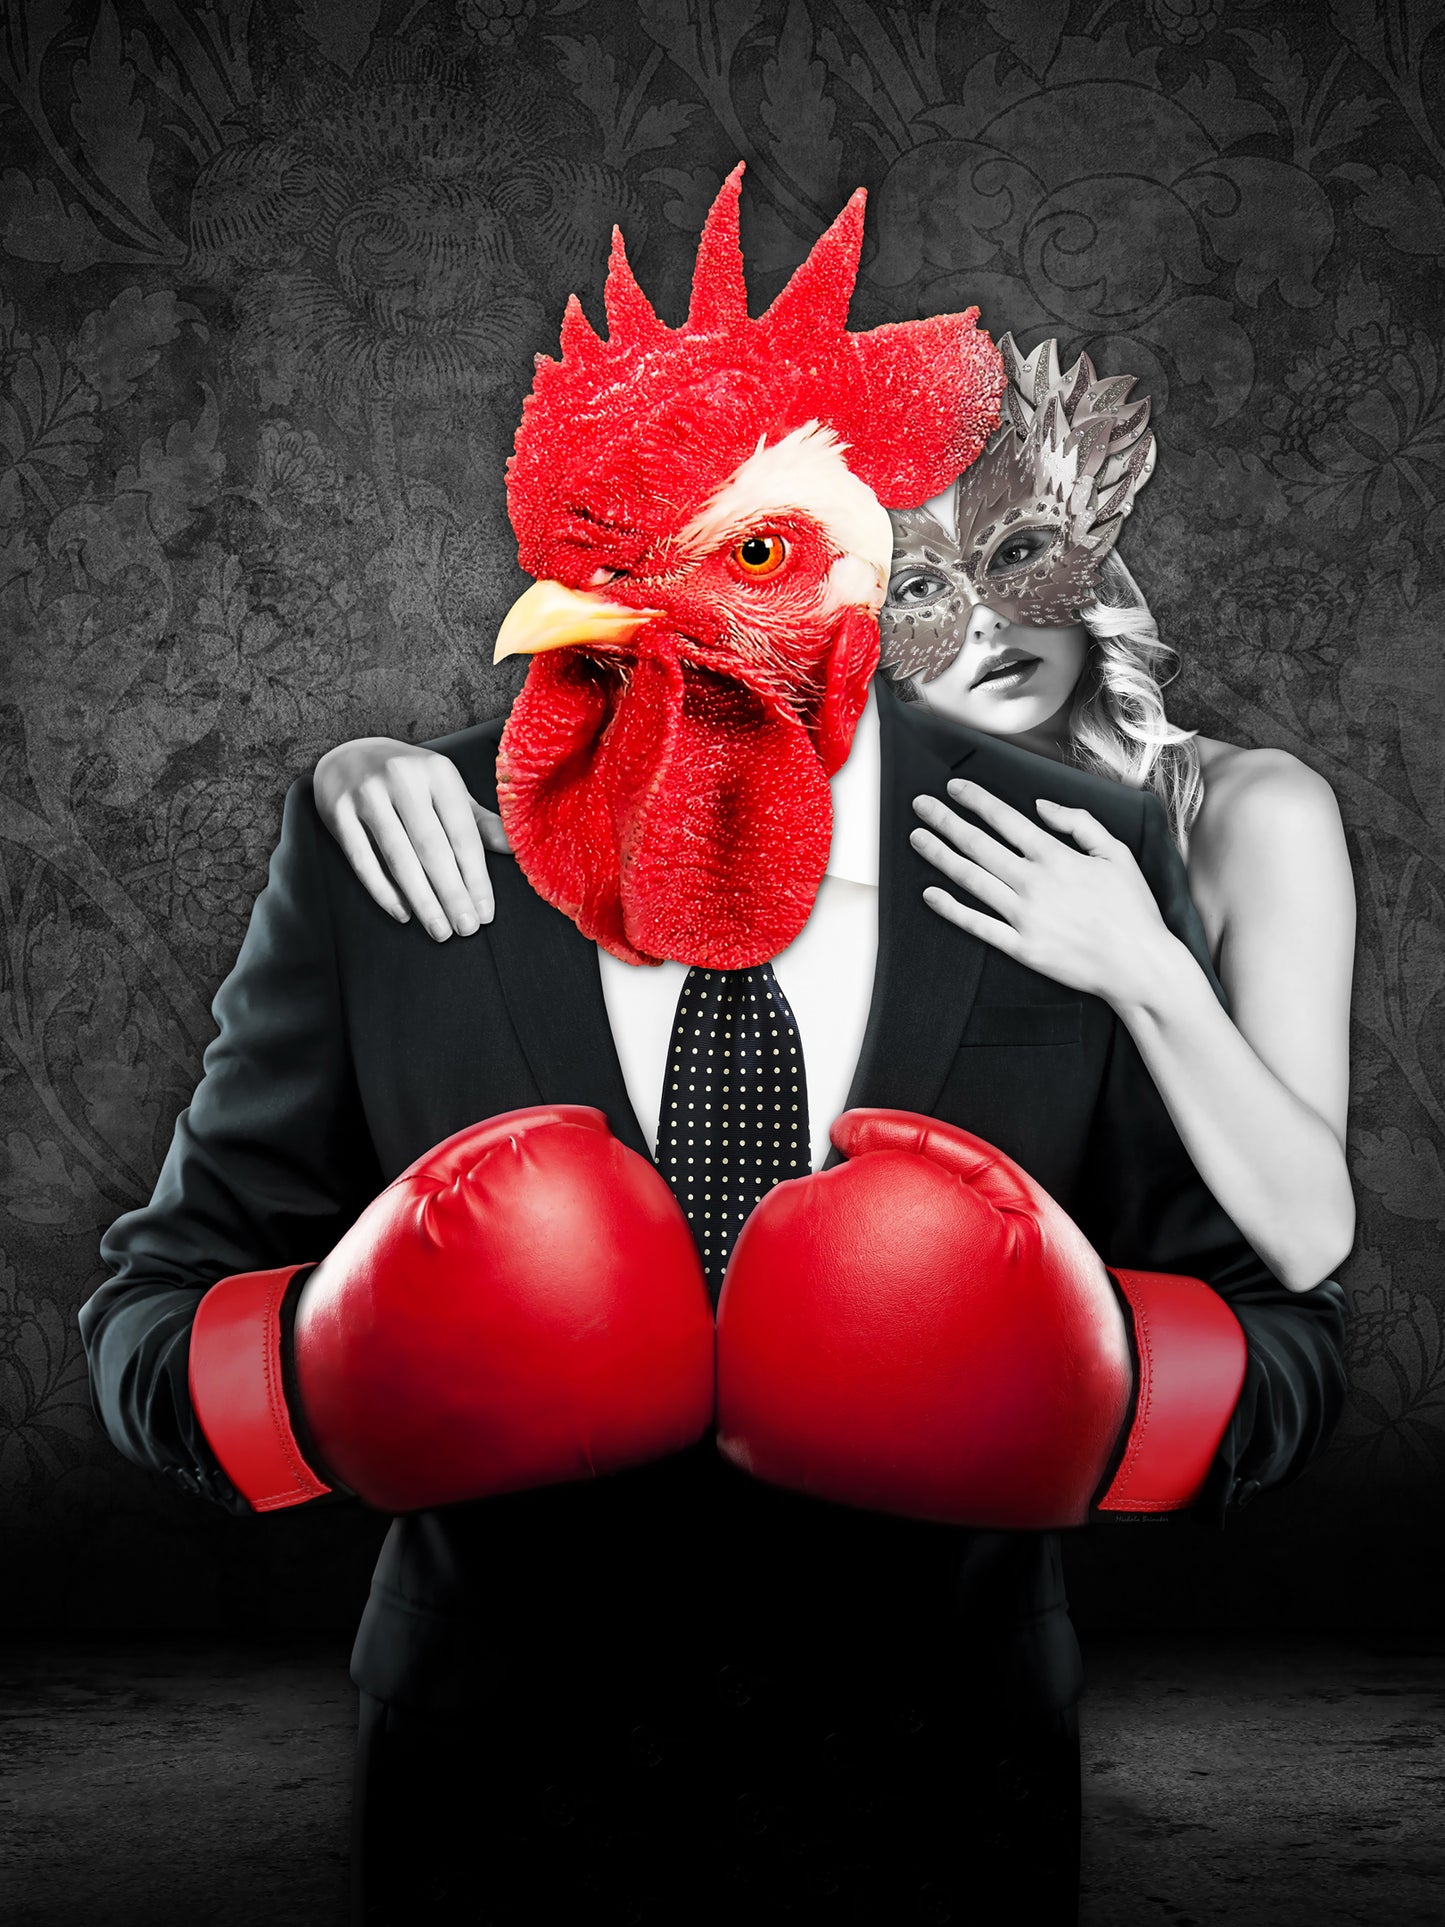 Le Coq Art - ROOSTER BOXING ARTWORK - Edition of 7